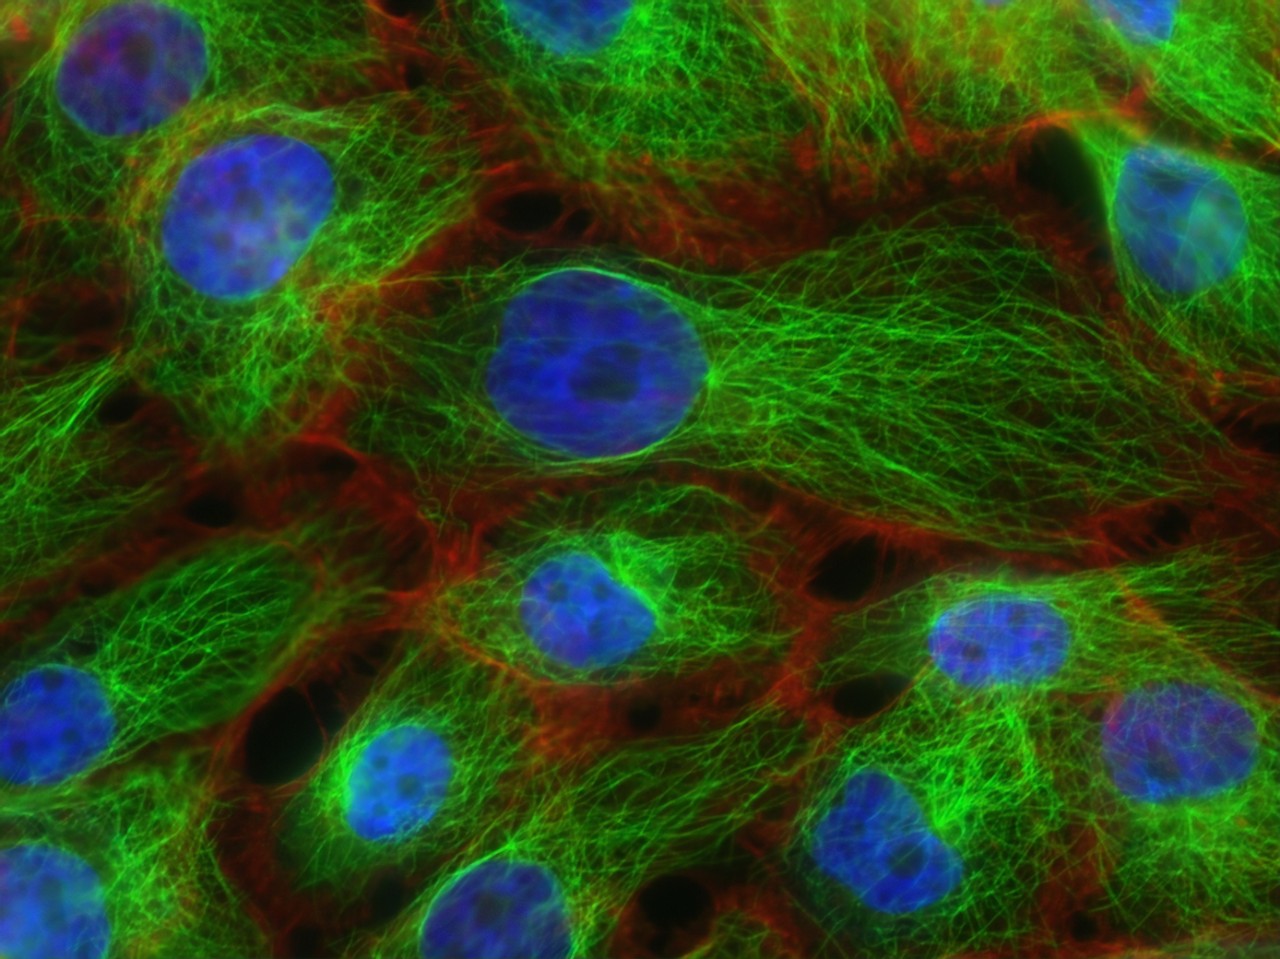 Human breast cancer cells